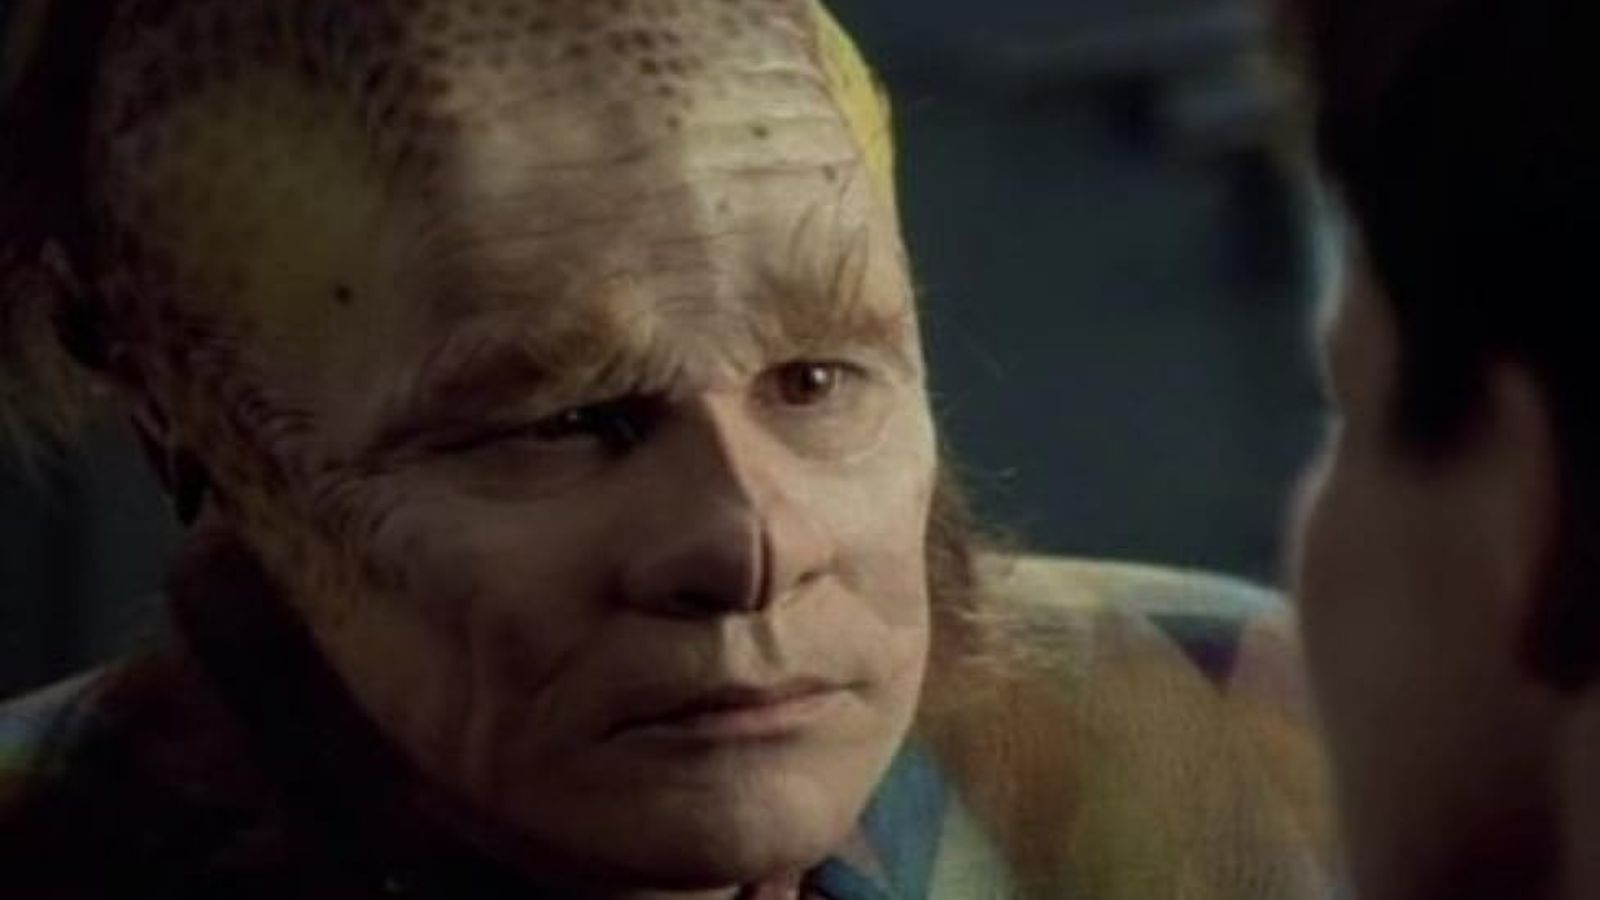 <span>Some people </span><span>just</span> <span>don’t</span><span> know when to stop giving advice.</span><span> Welcome to Neelix. With his incessant buzzing that screamed of caffeine overload, his constant meddling made him vastly unlikable.</span>